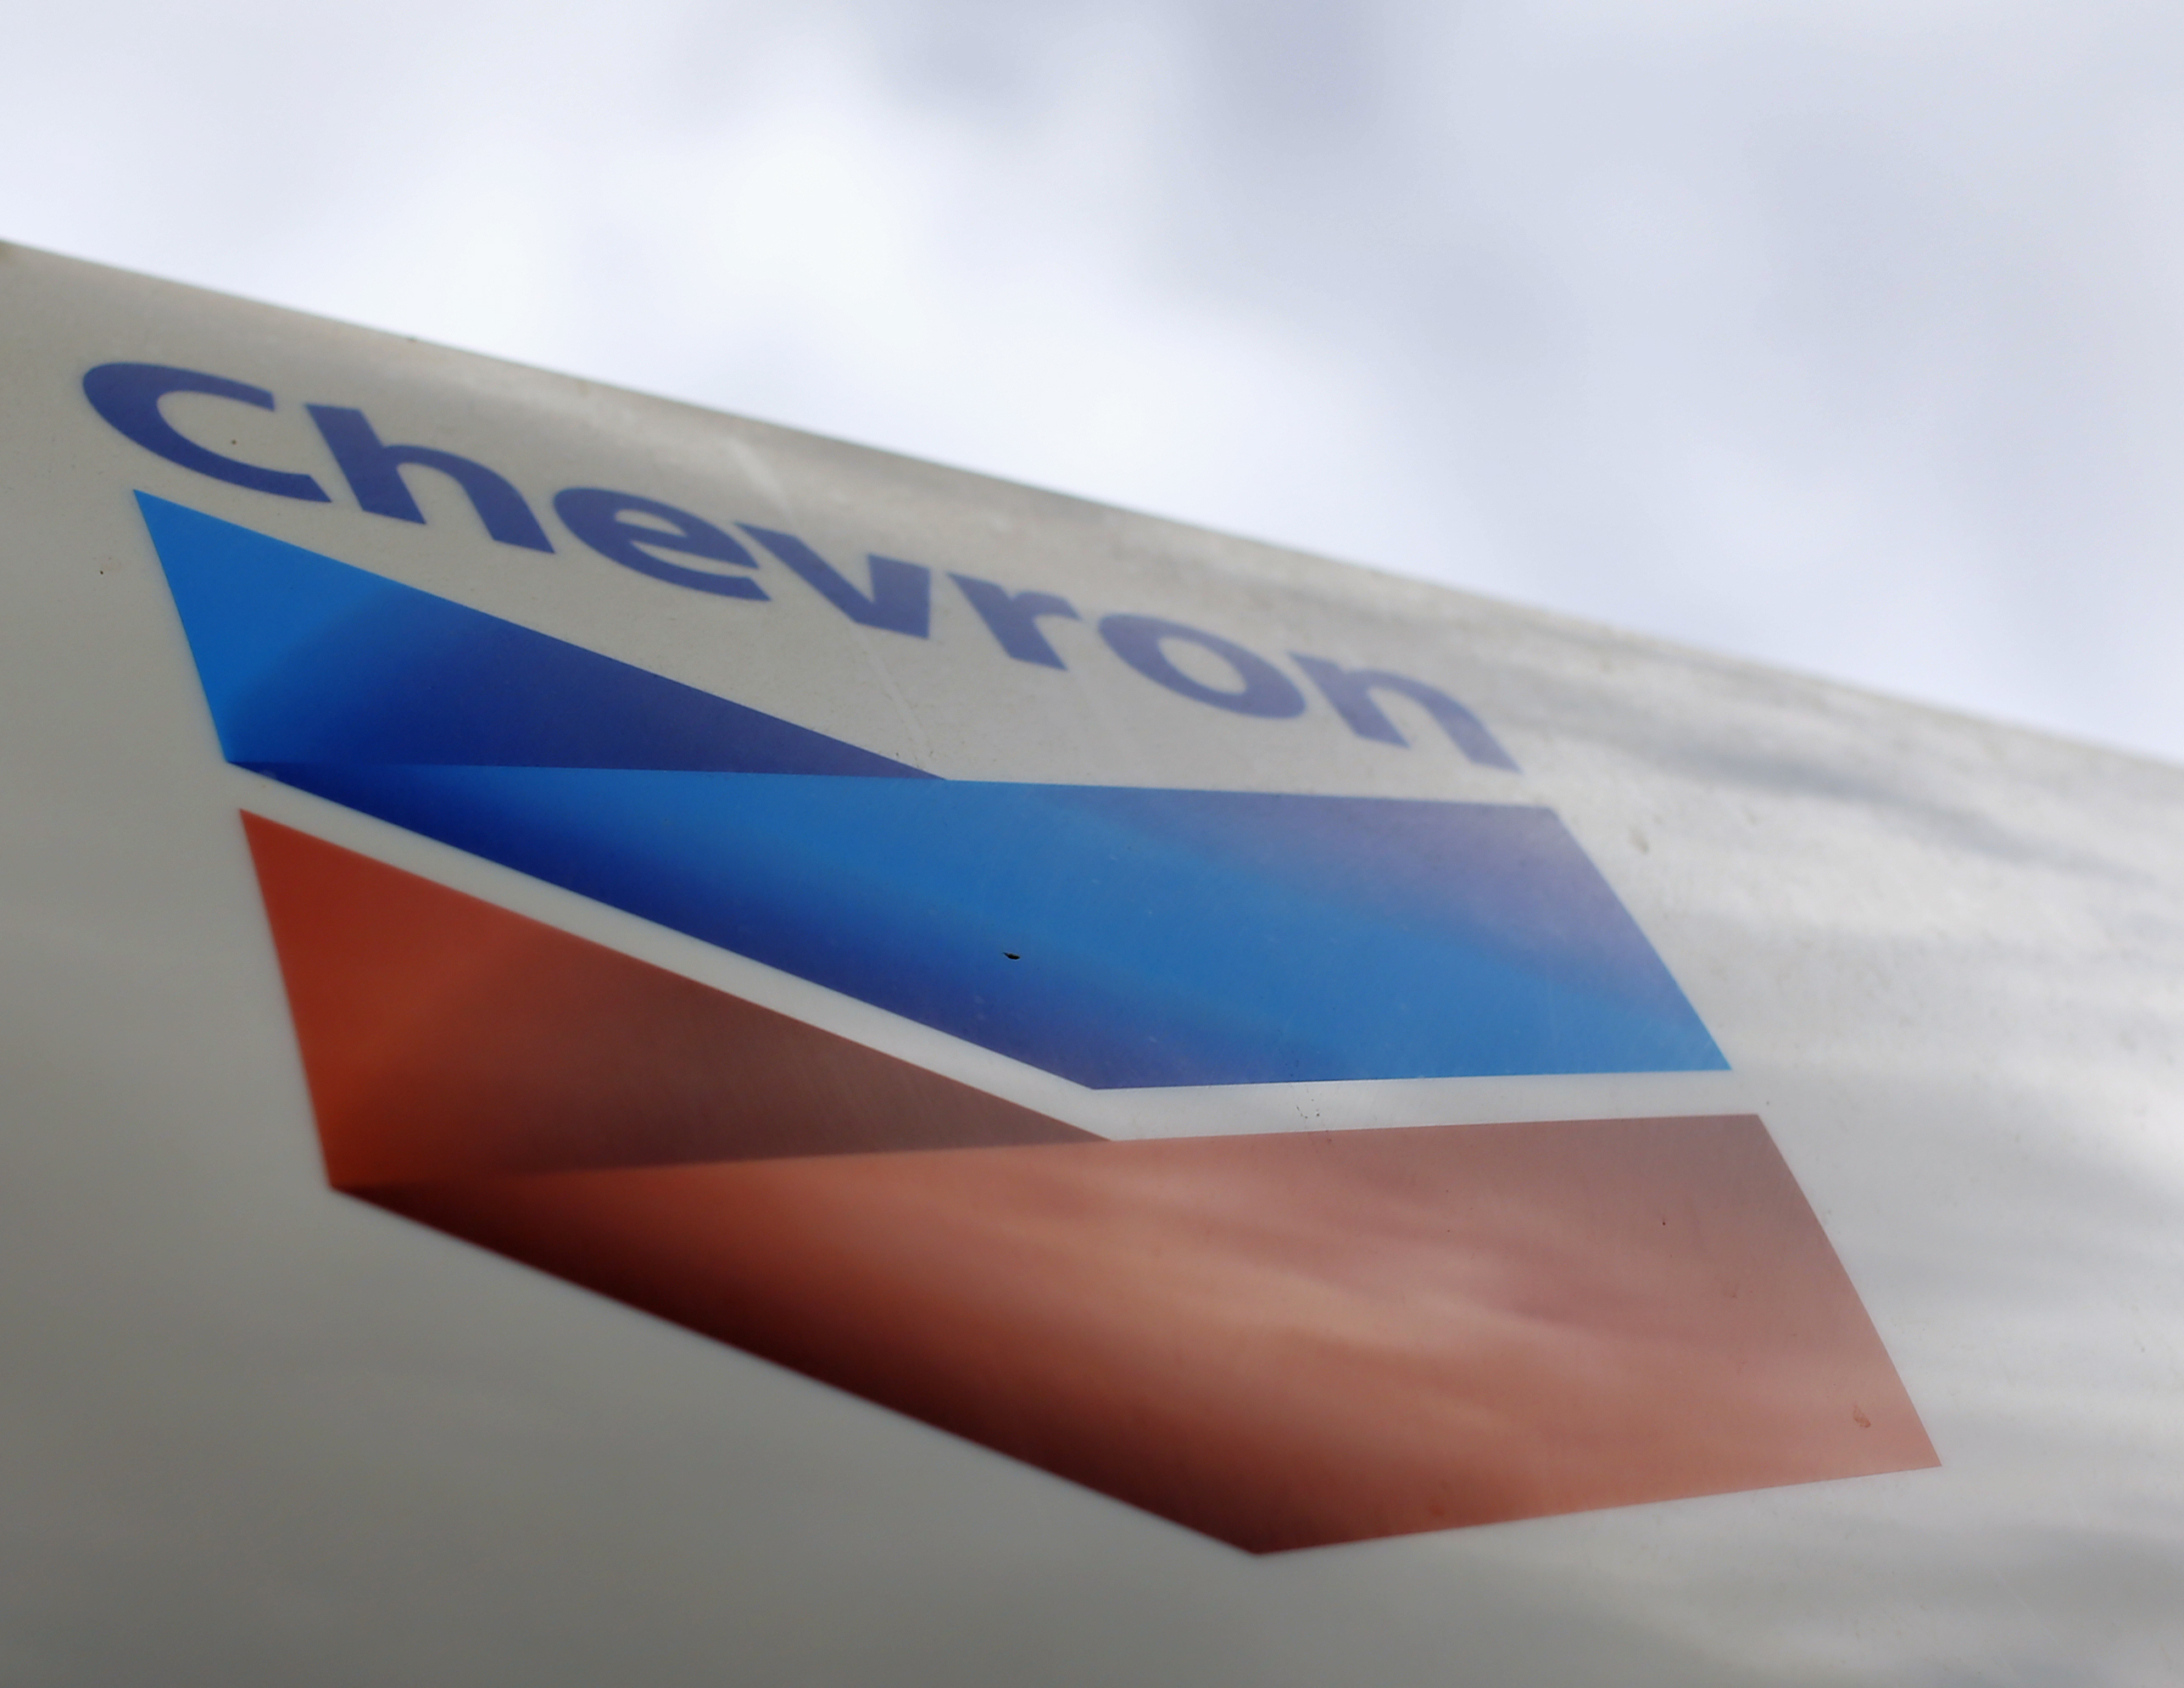 A Chevron gas station sign is shown at one of their retain gas stations in Cardiff, California